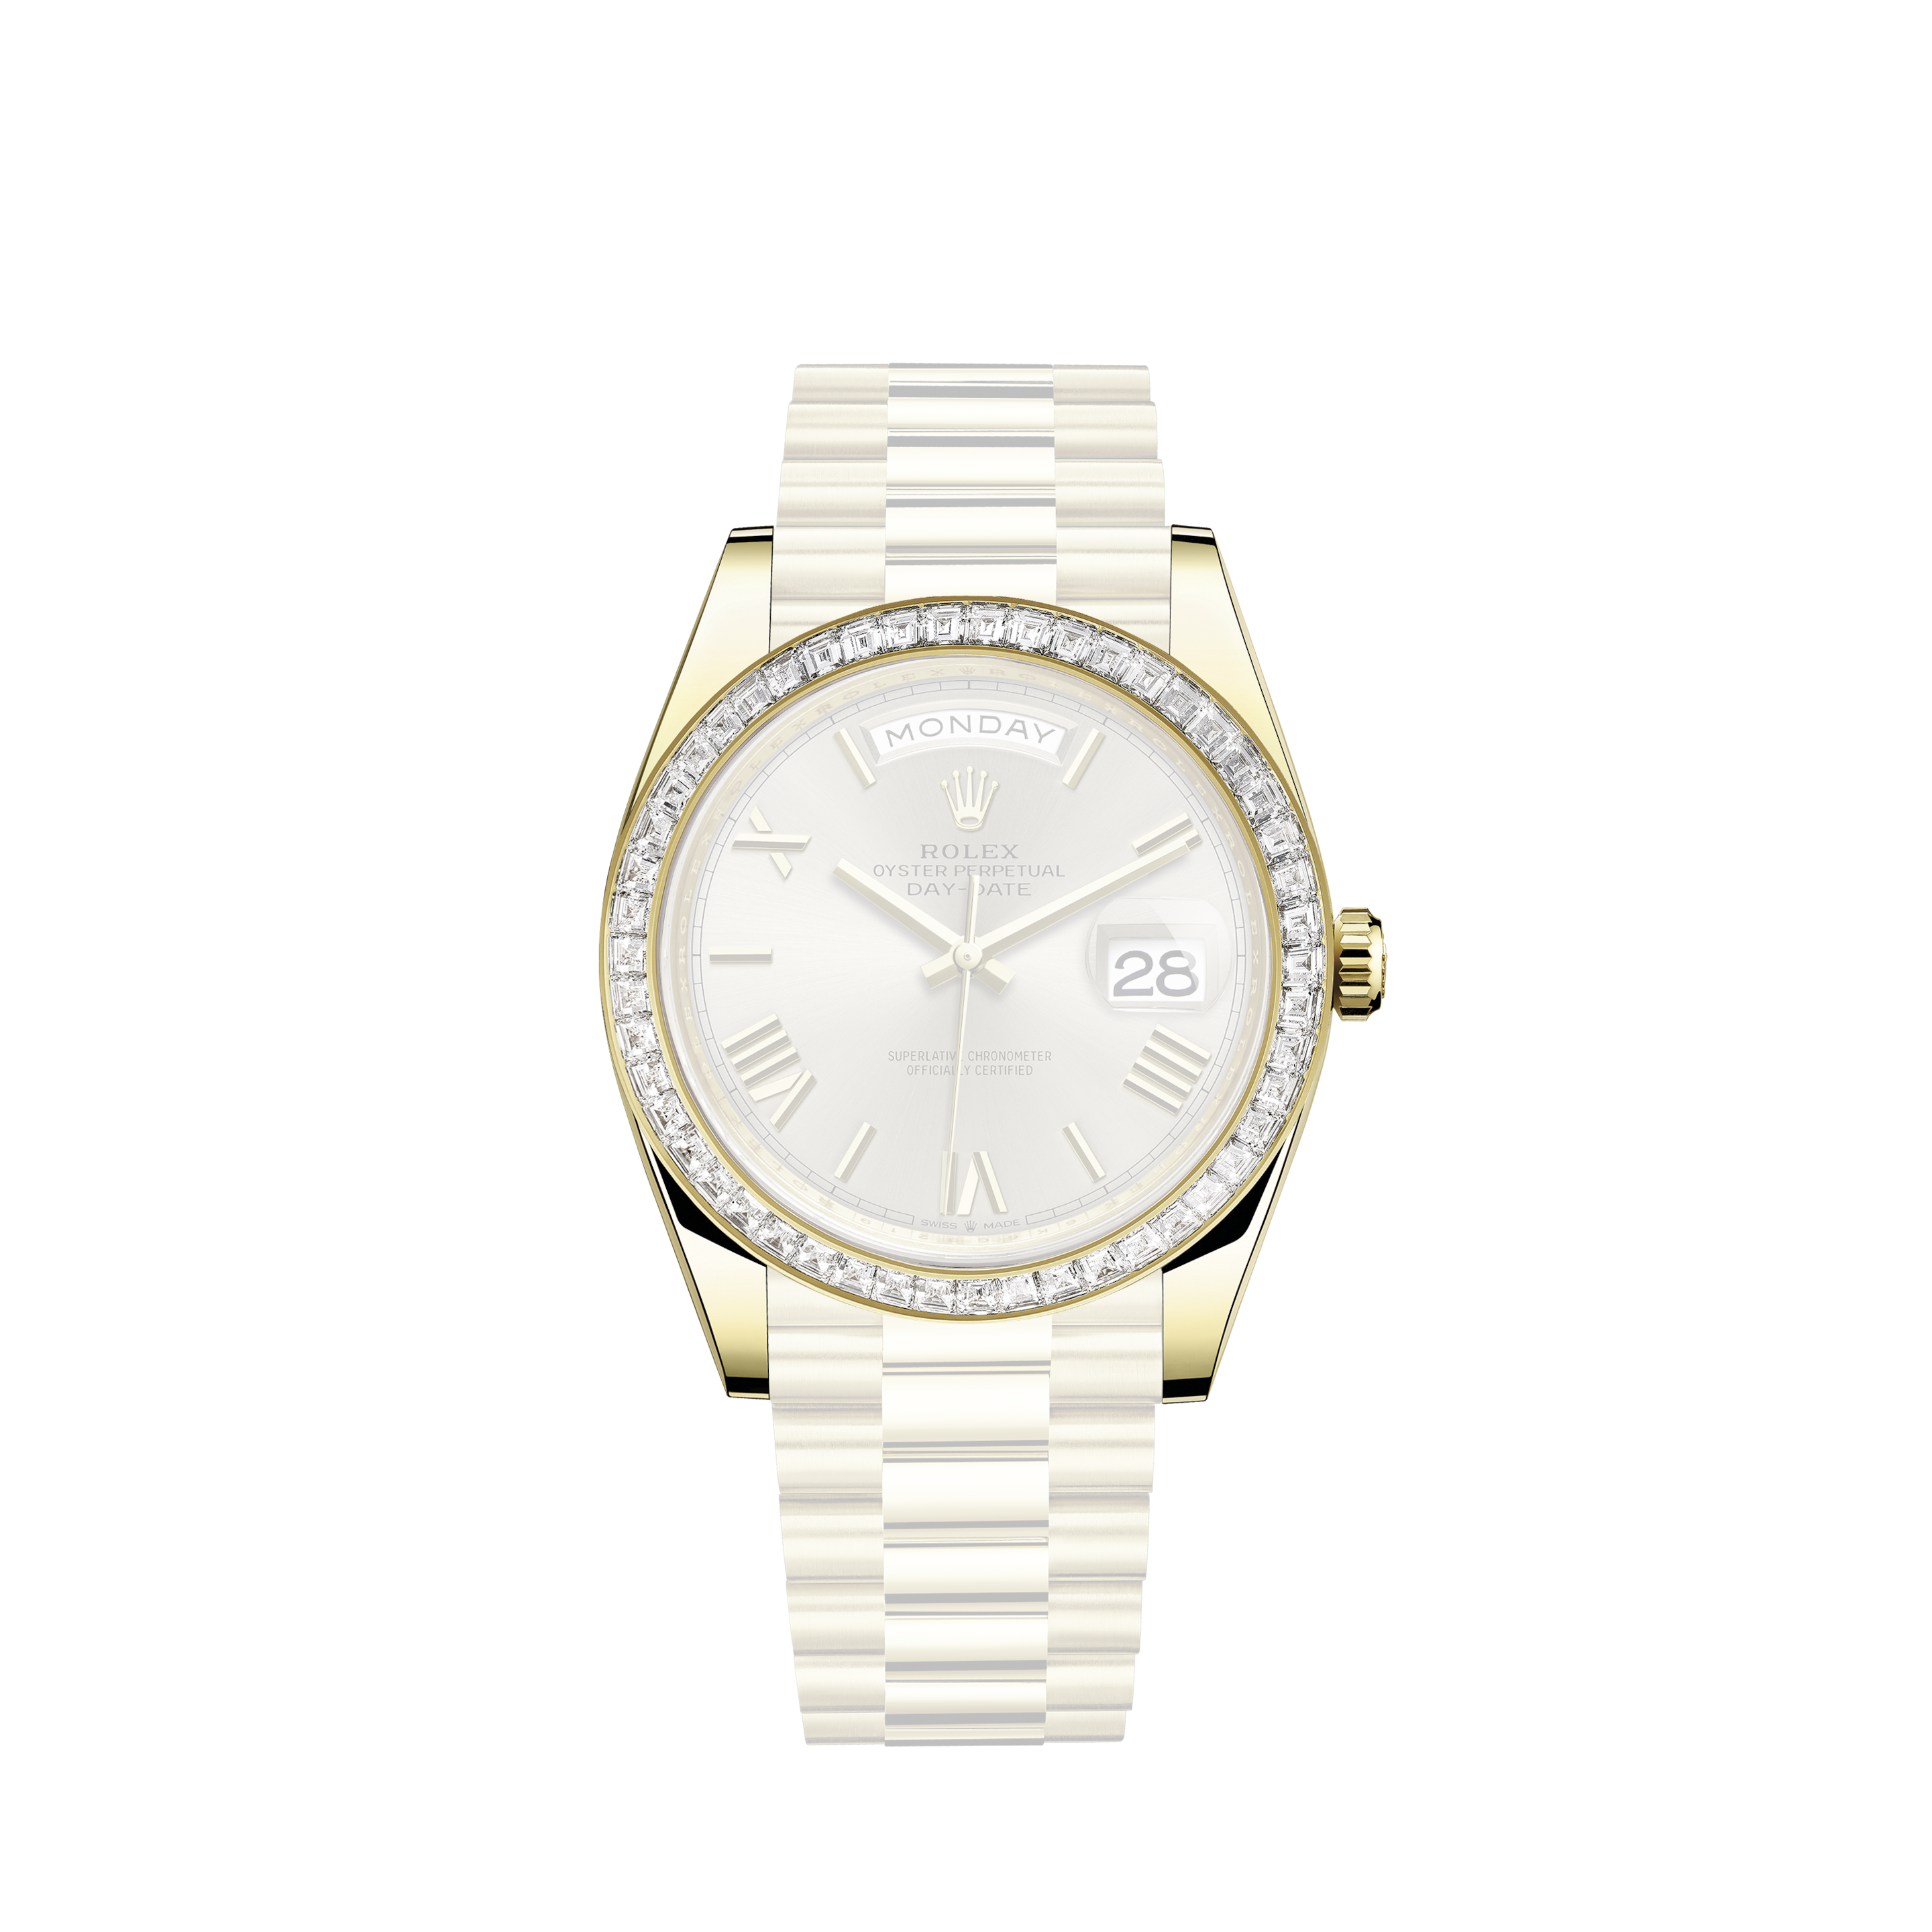 Rolex Datejust 36mm Blue Dial Oyster Perpetual